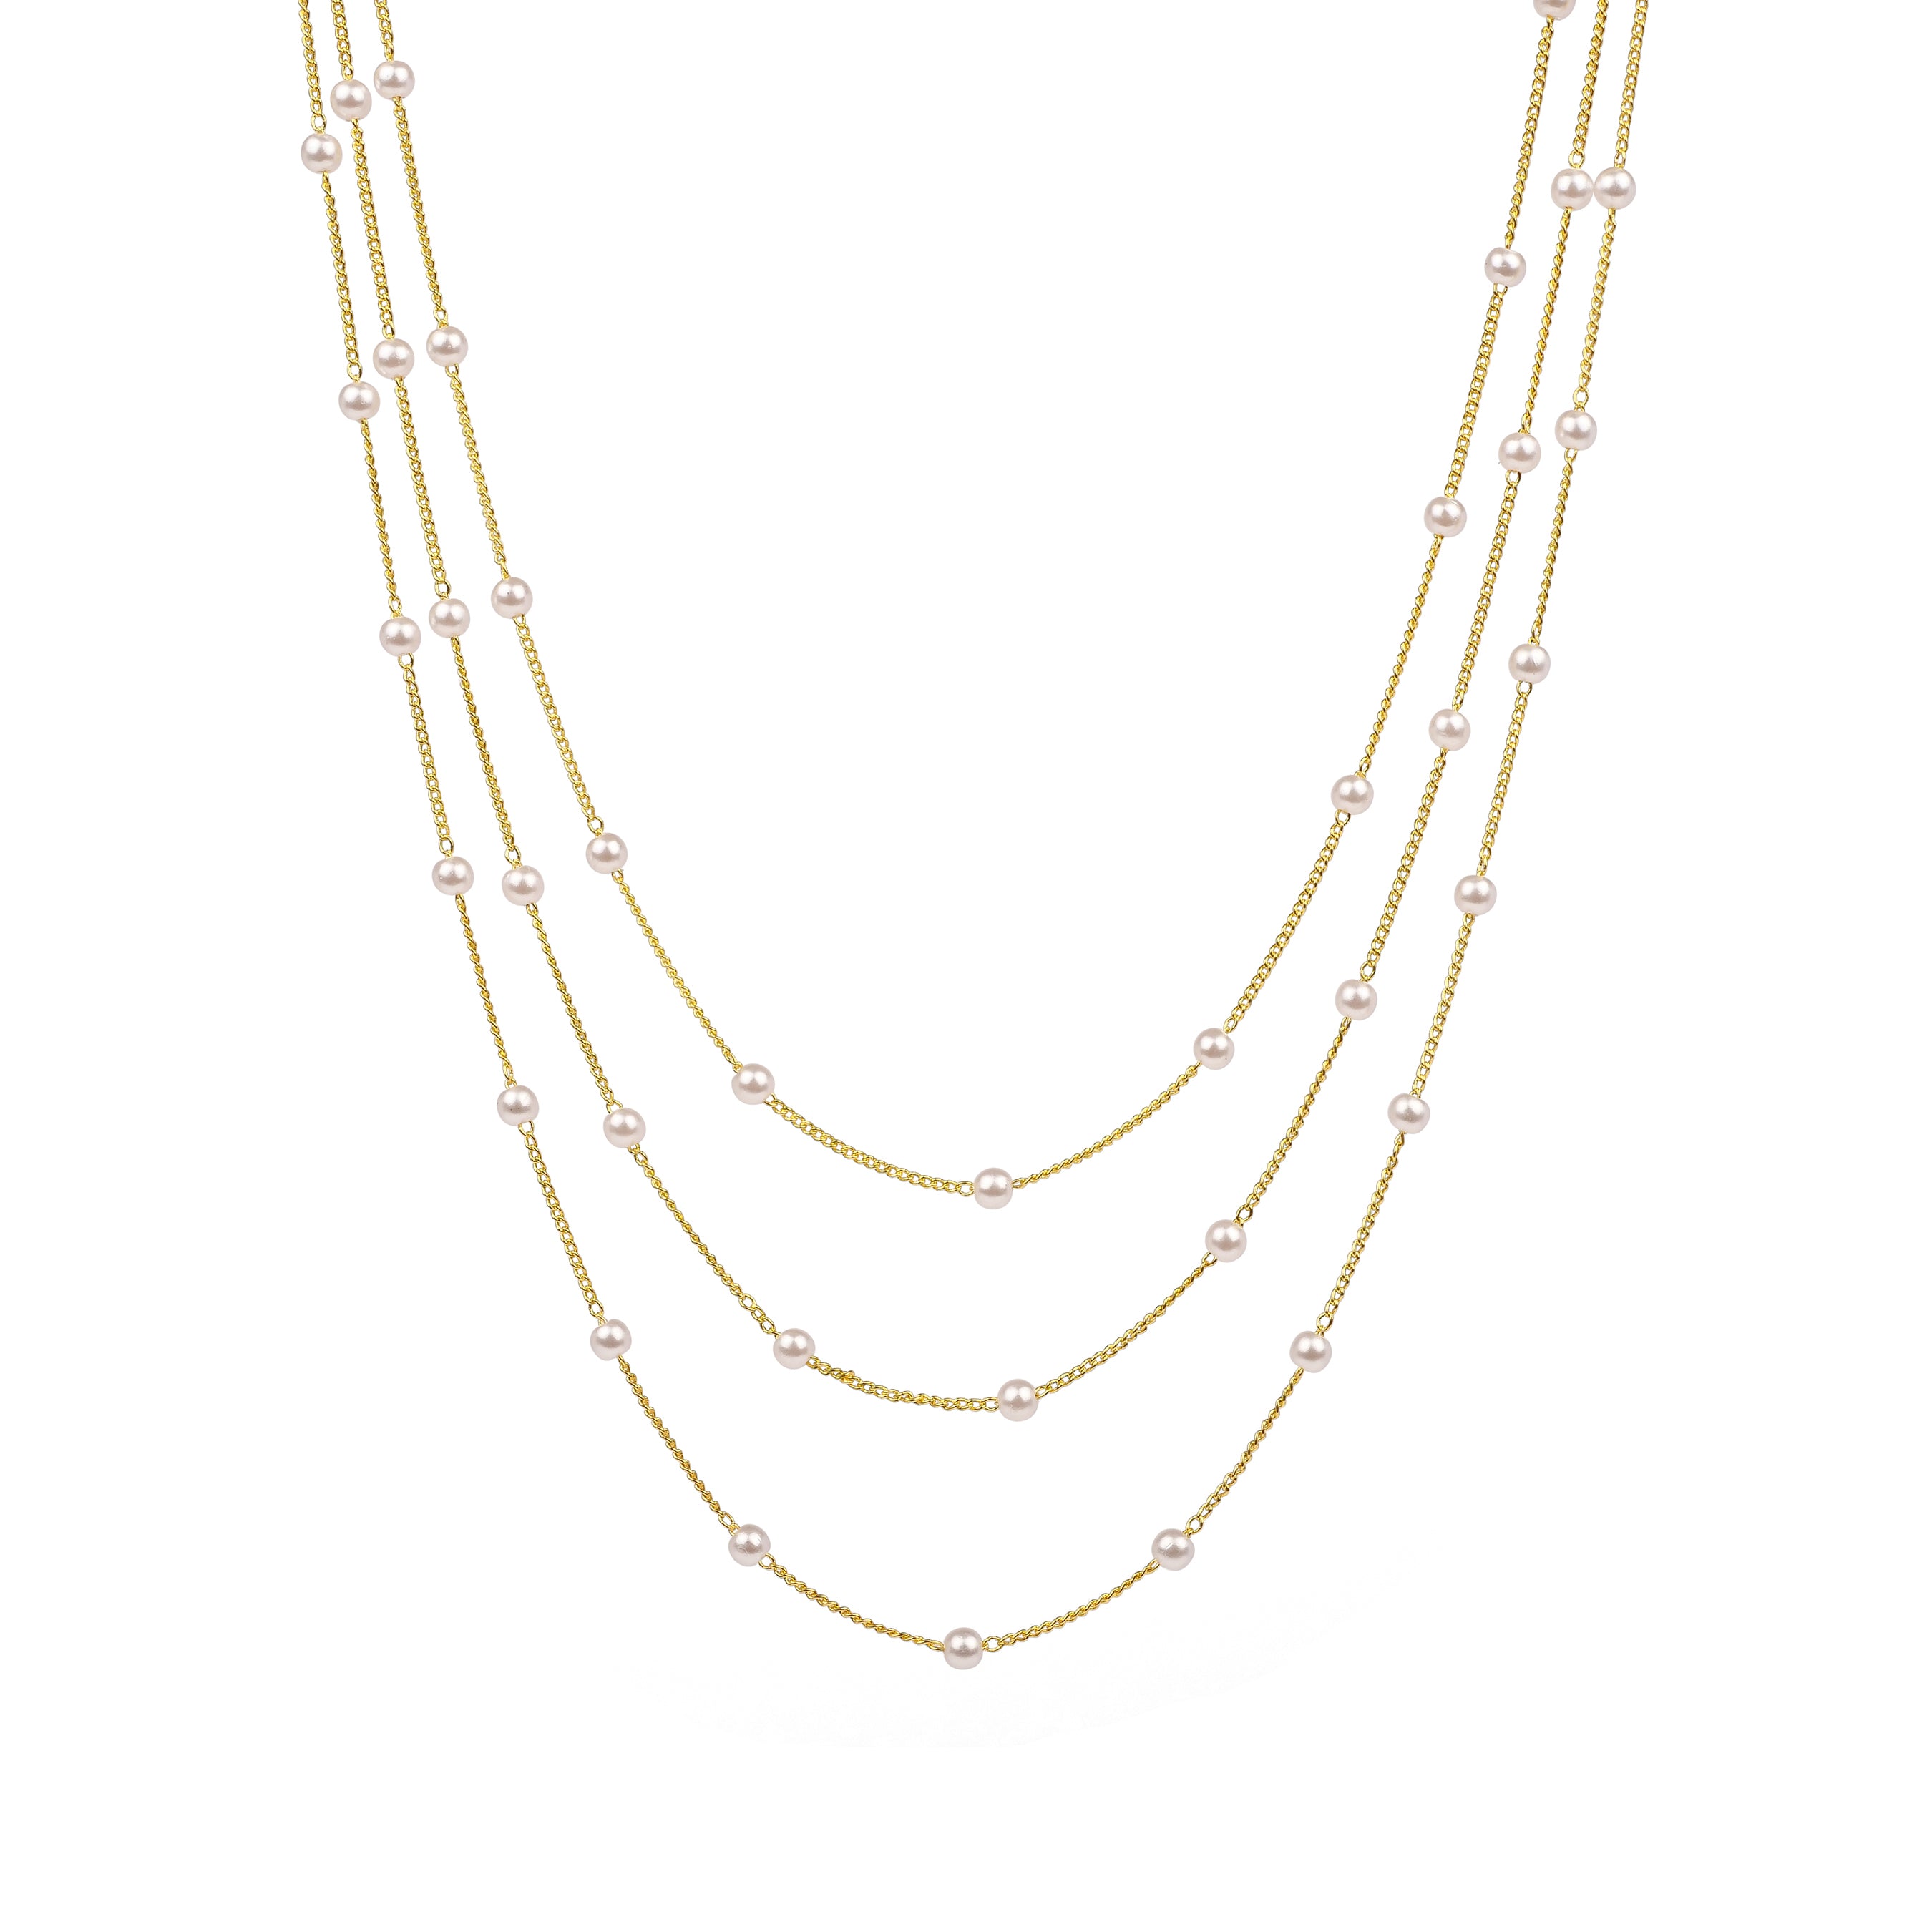 Triple Layer Pearl Chain in Gold